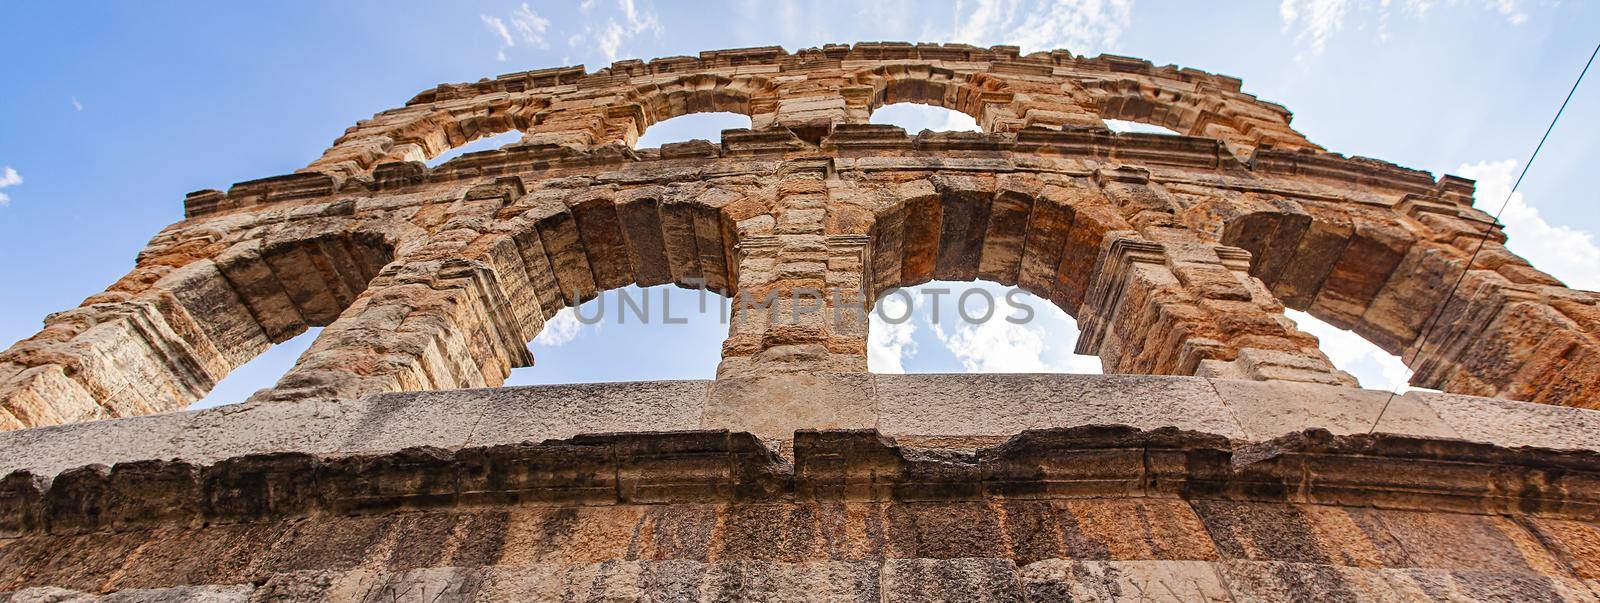 Verona Arena amphitheater, banner image with copy space